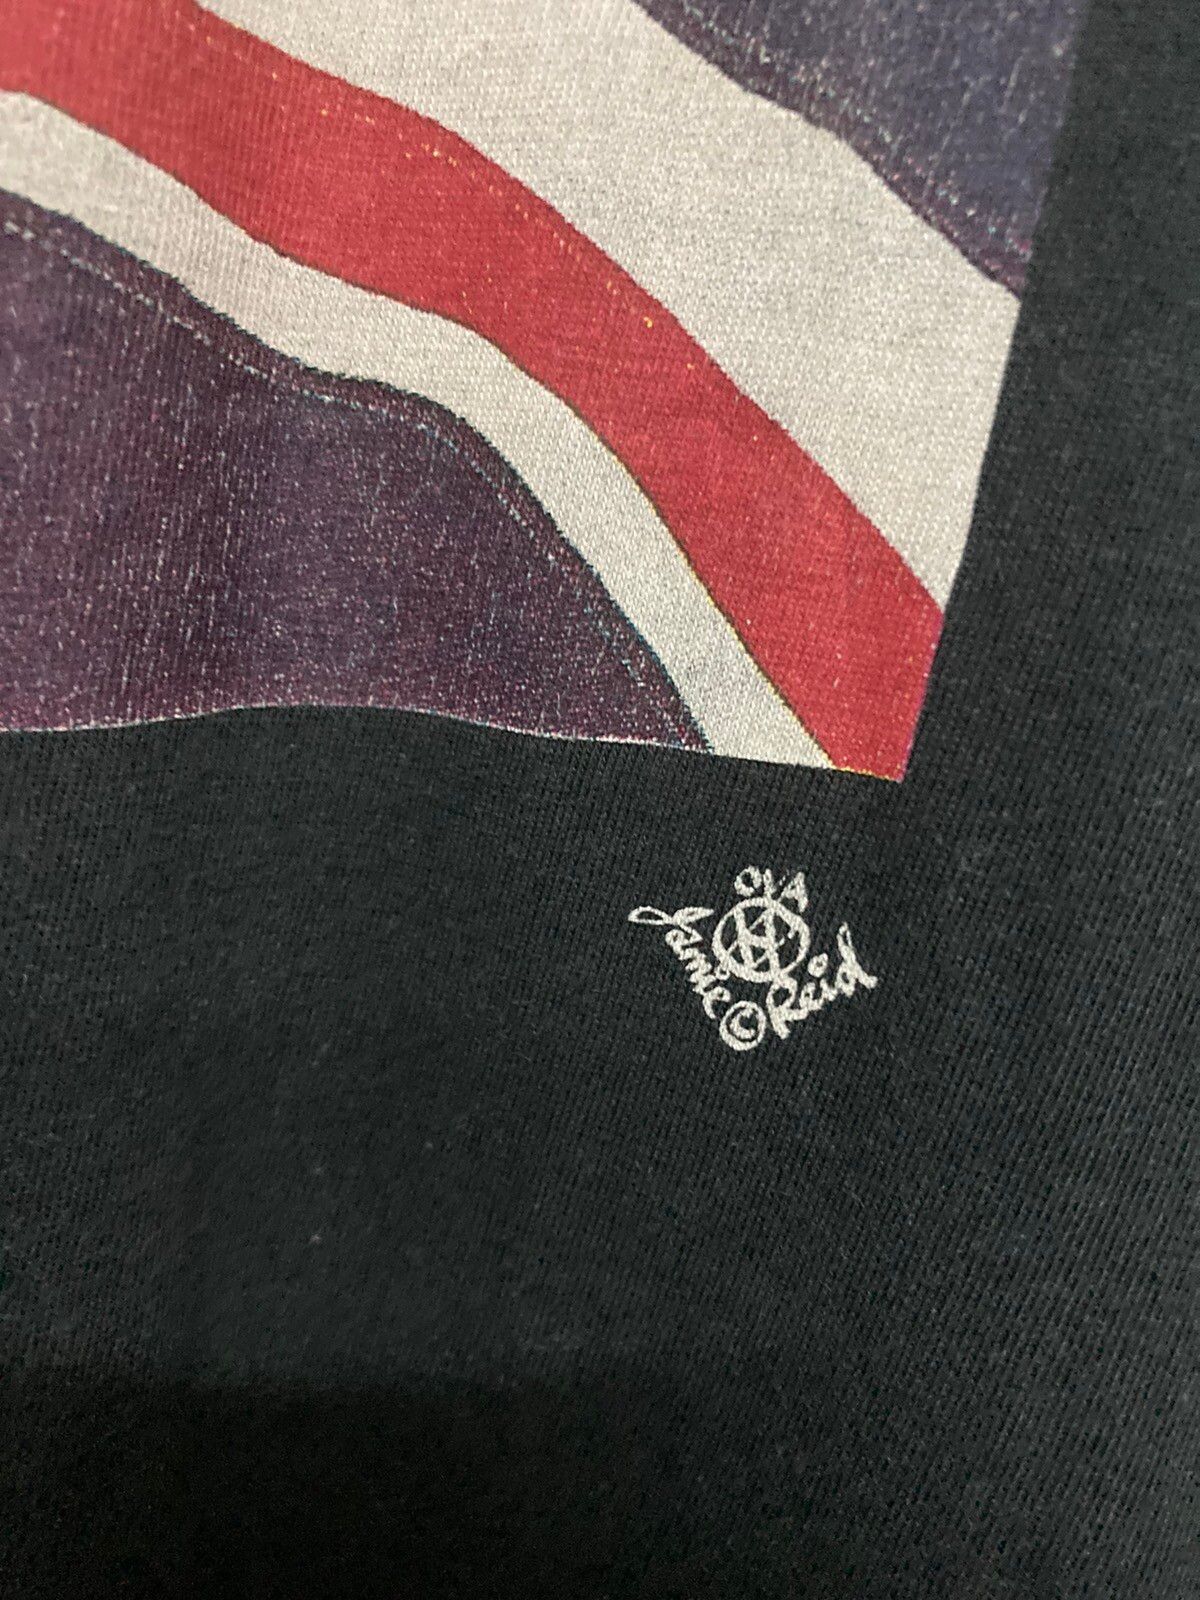 Vintage 90s Paul Smith x Sex Pistols God Save The Queen Tee - 6